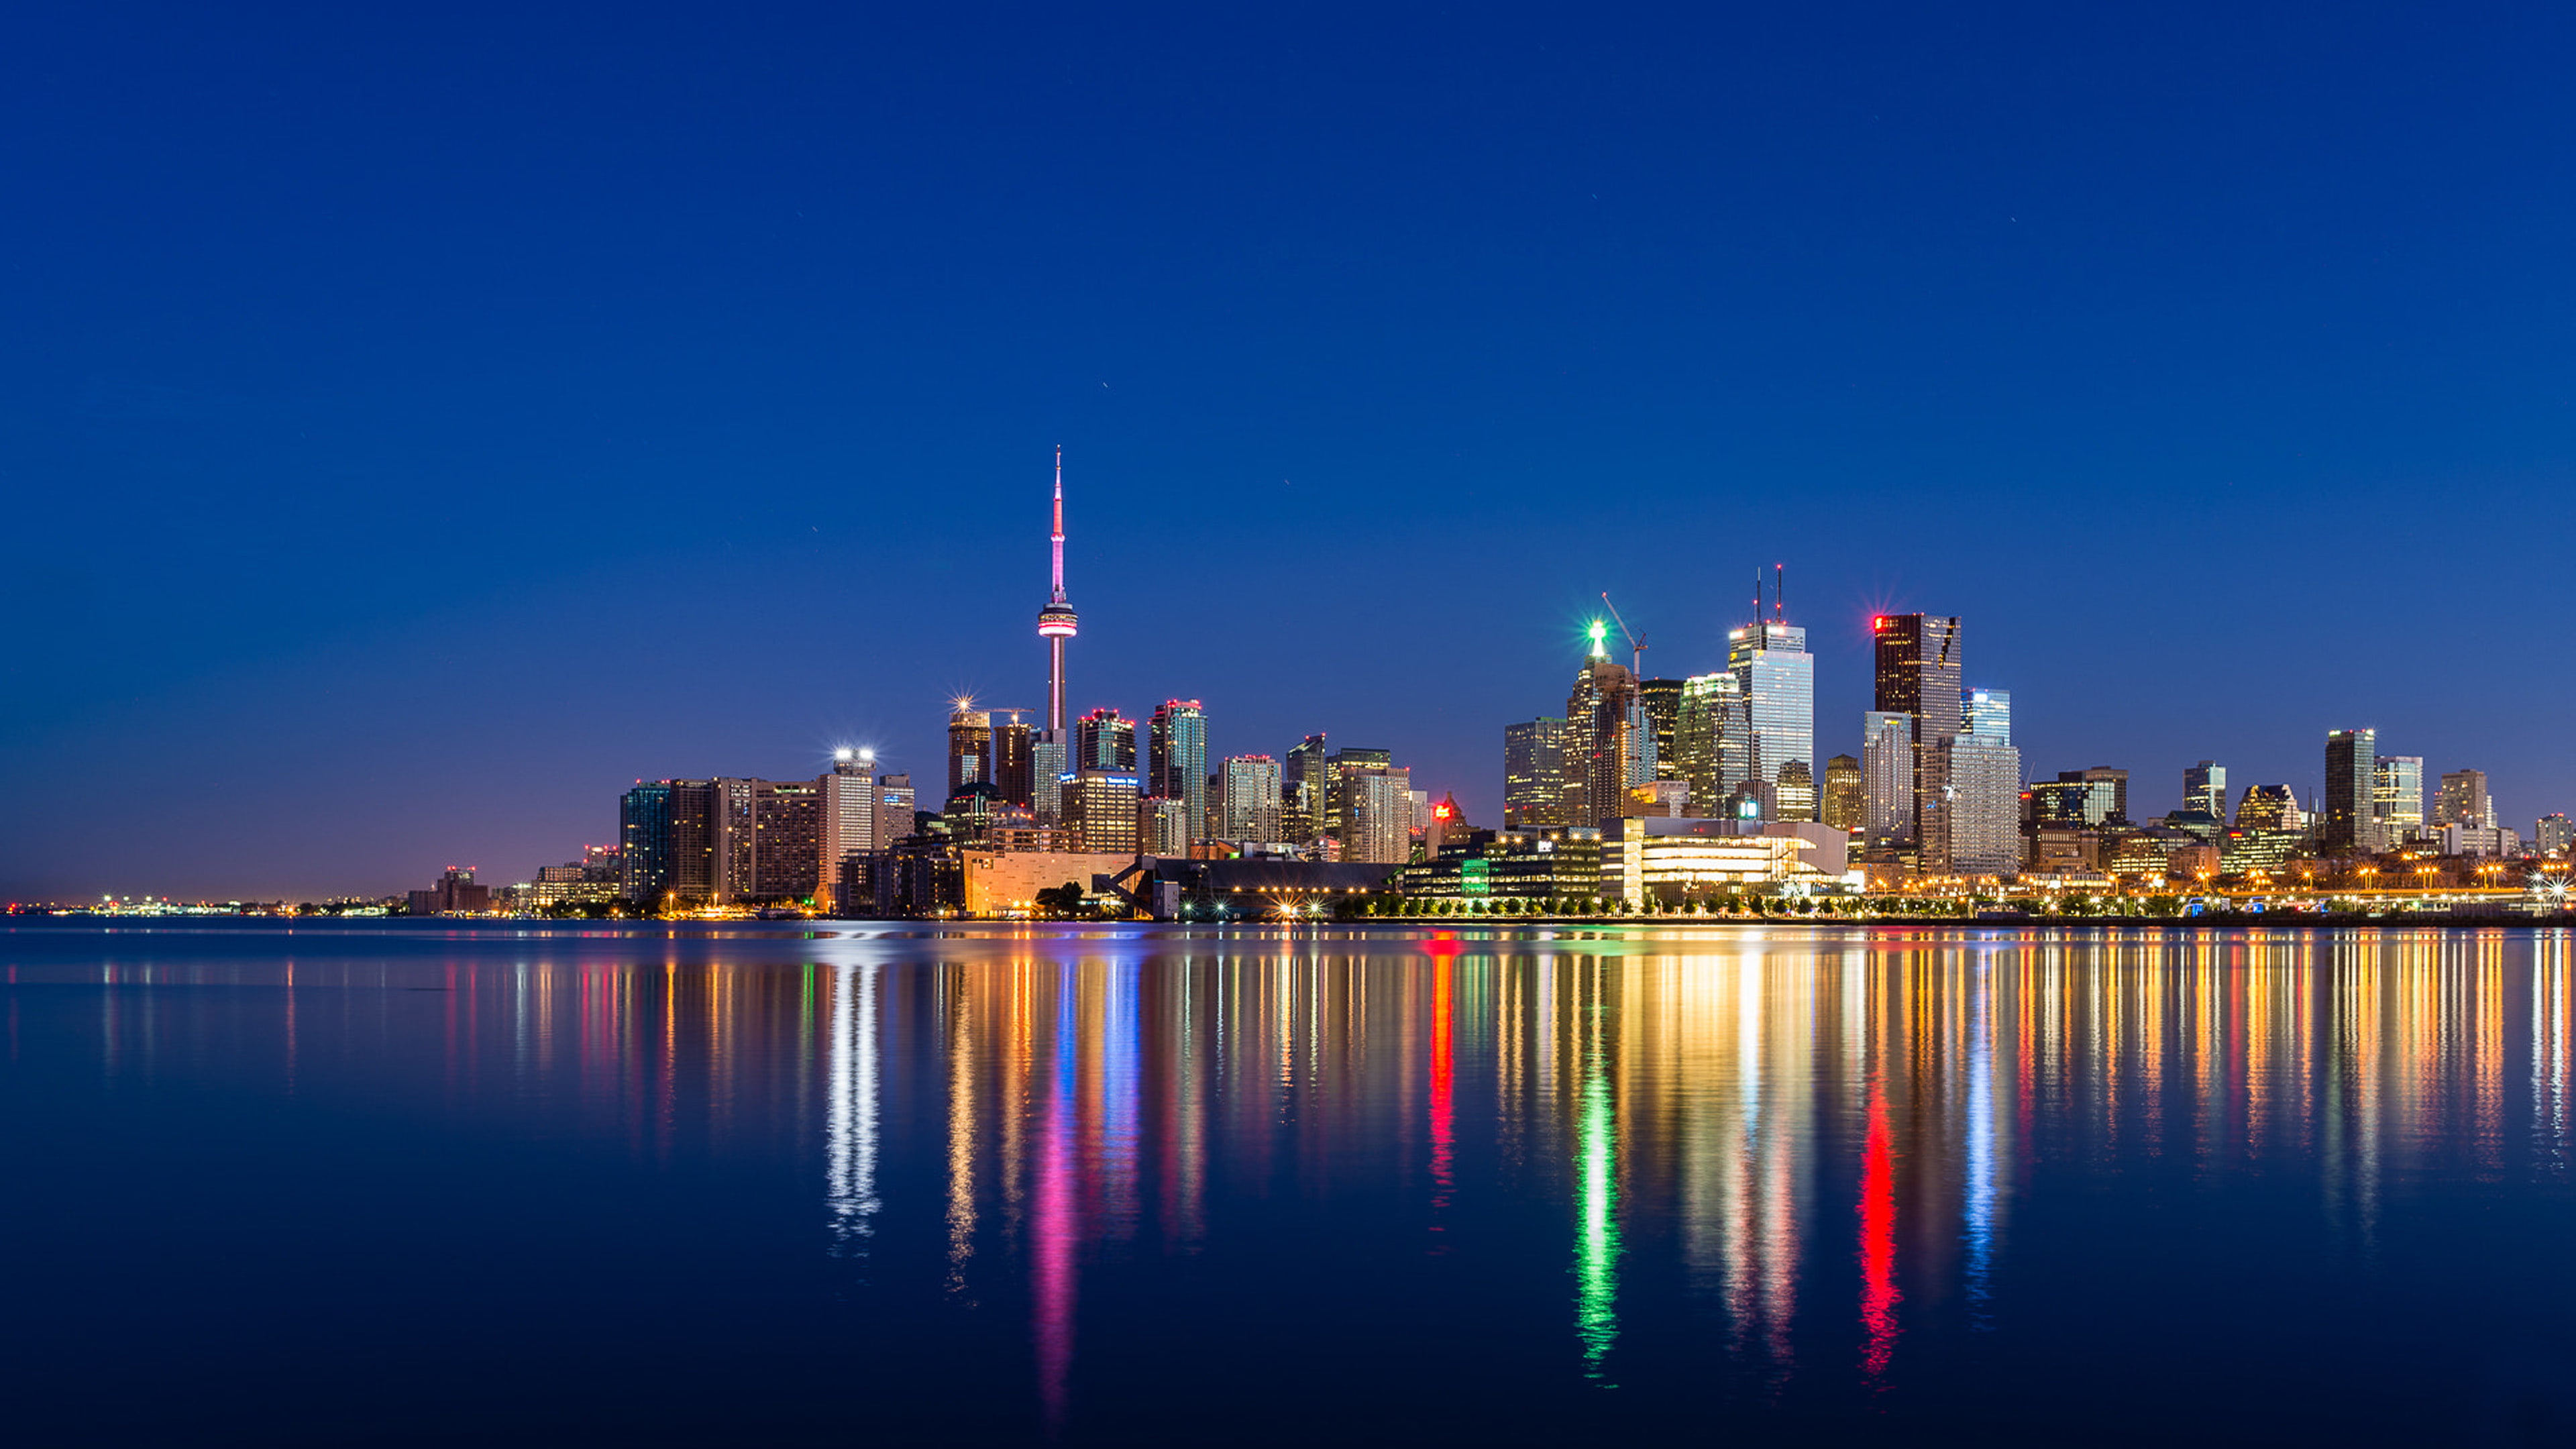 Toronto Skyline At Night Images Android Wallpapers For Your Desktop Or Phone 3840×2160